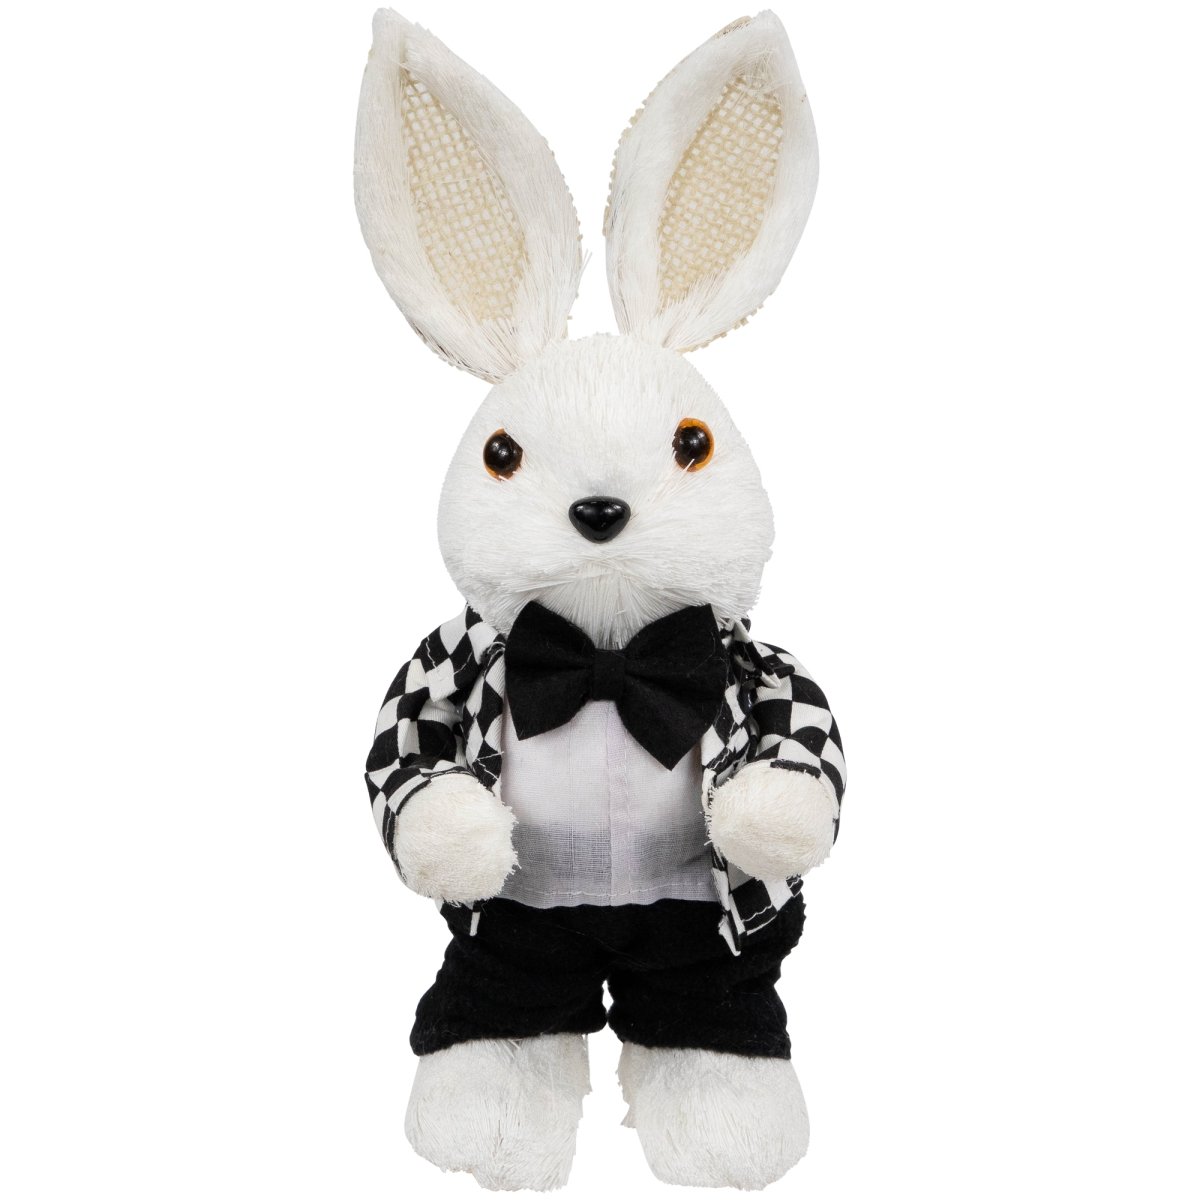 Picture of Northlight 35737349 10 x 4 x 4.25 in. Boy Easter Rabbit Figurine in Checkered Jacket